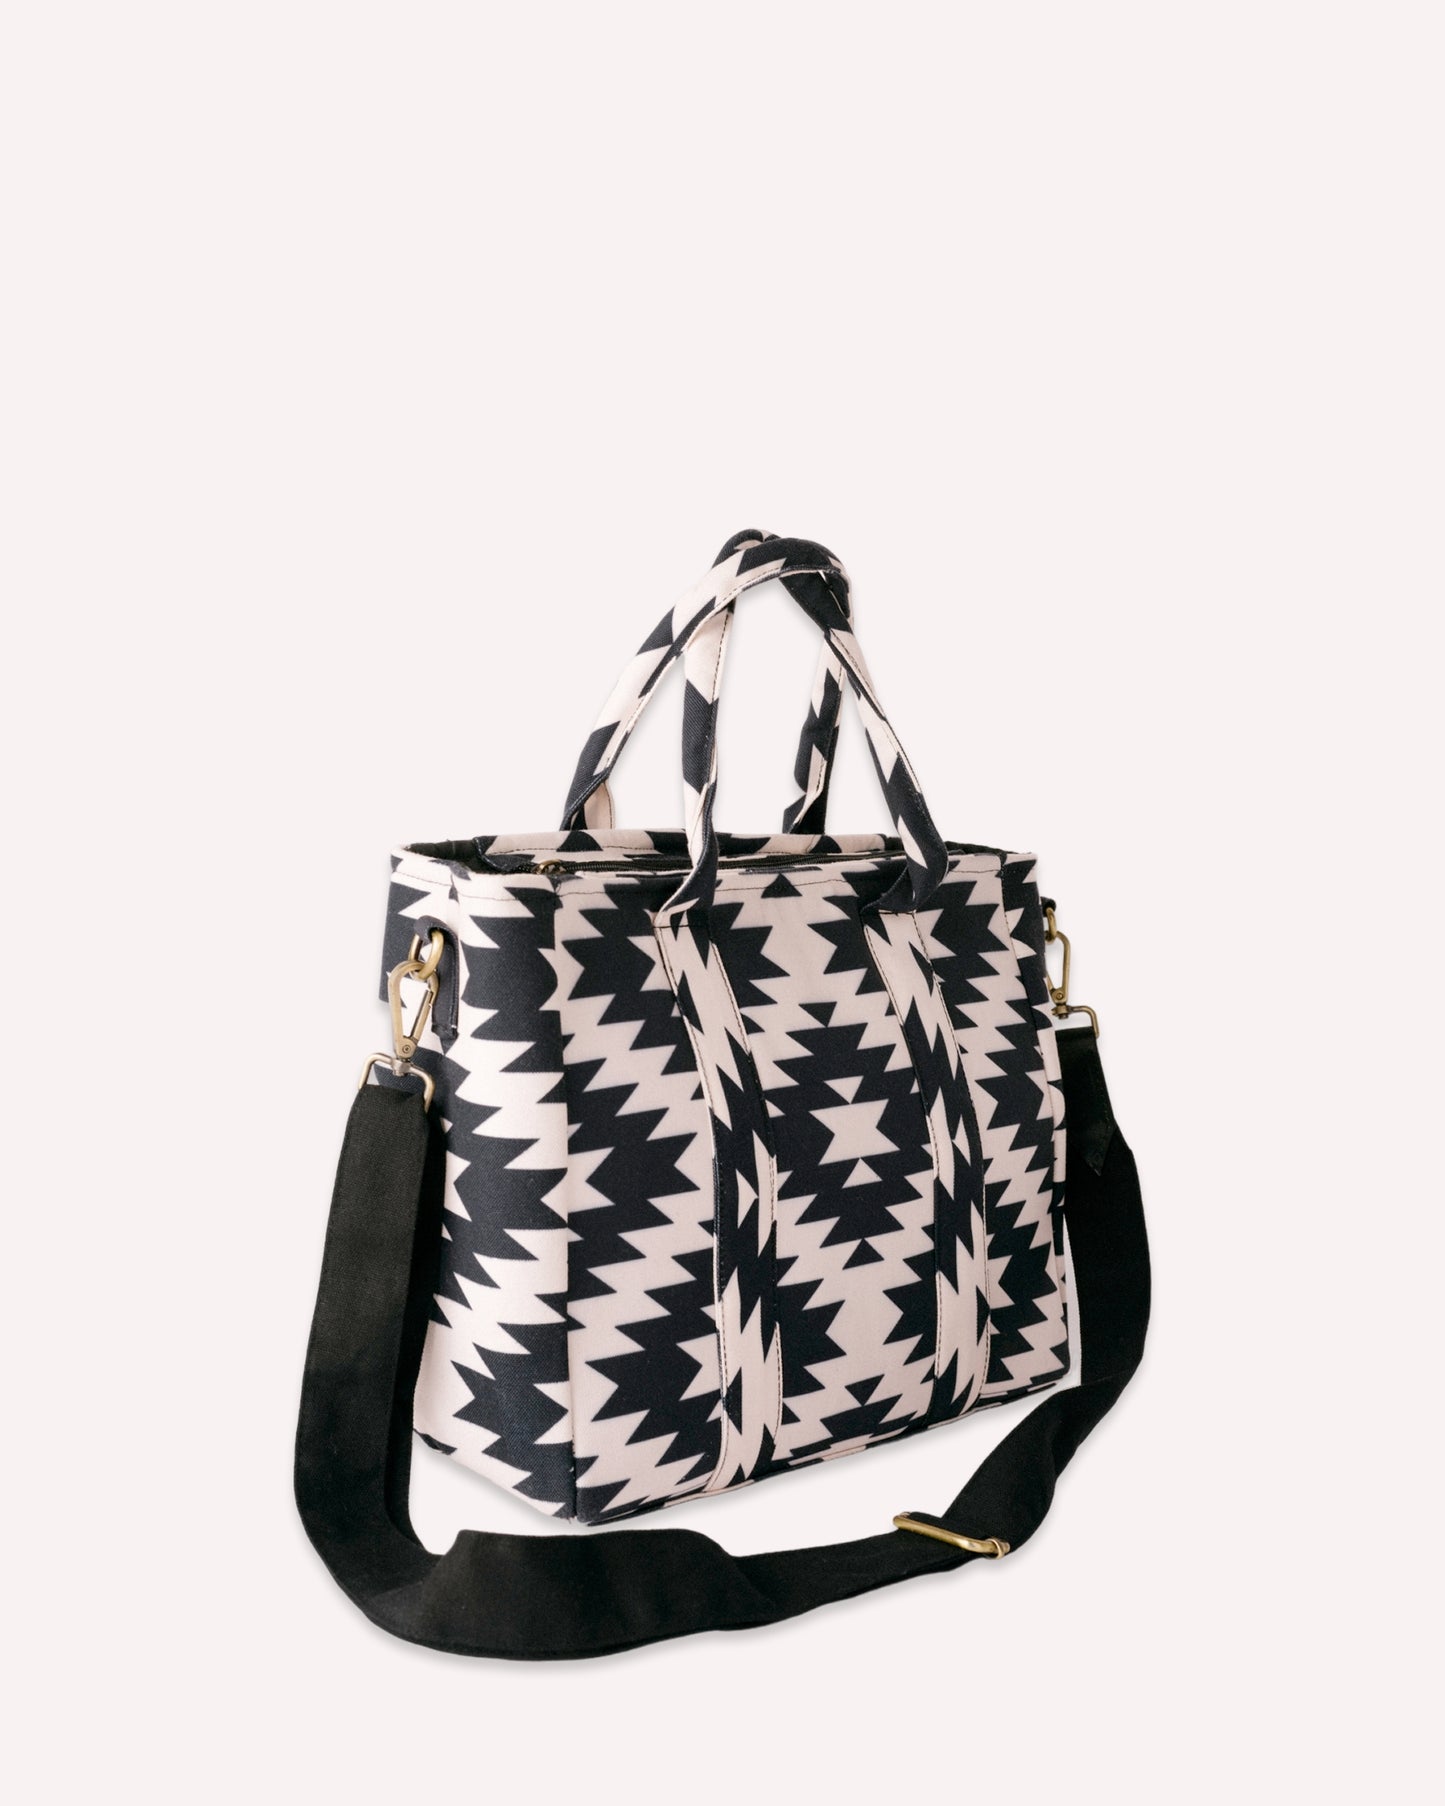 The City Tote Black and White